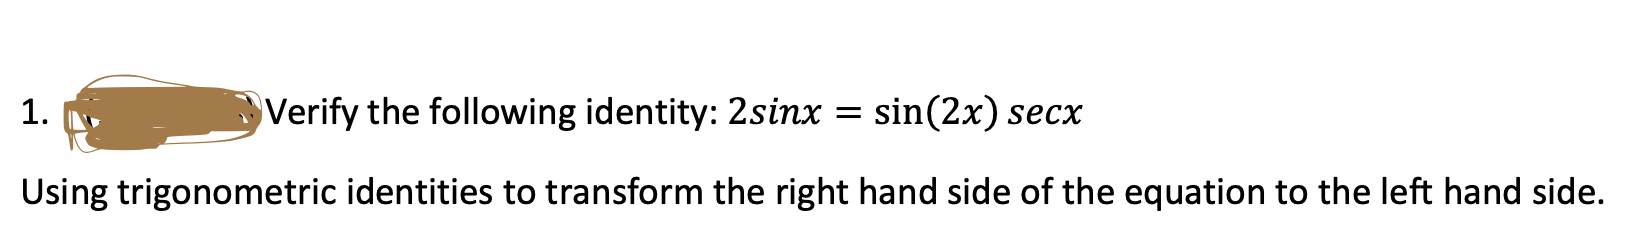 1.
Verify the following identity: 2sinx = sin(2x) secx
Using trigonometric identities to transform the right hand side of the equation to the left hand side.
